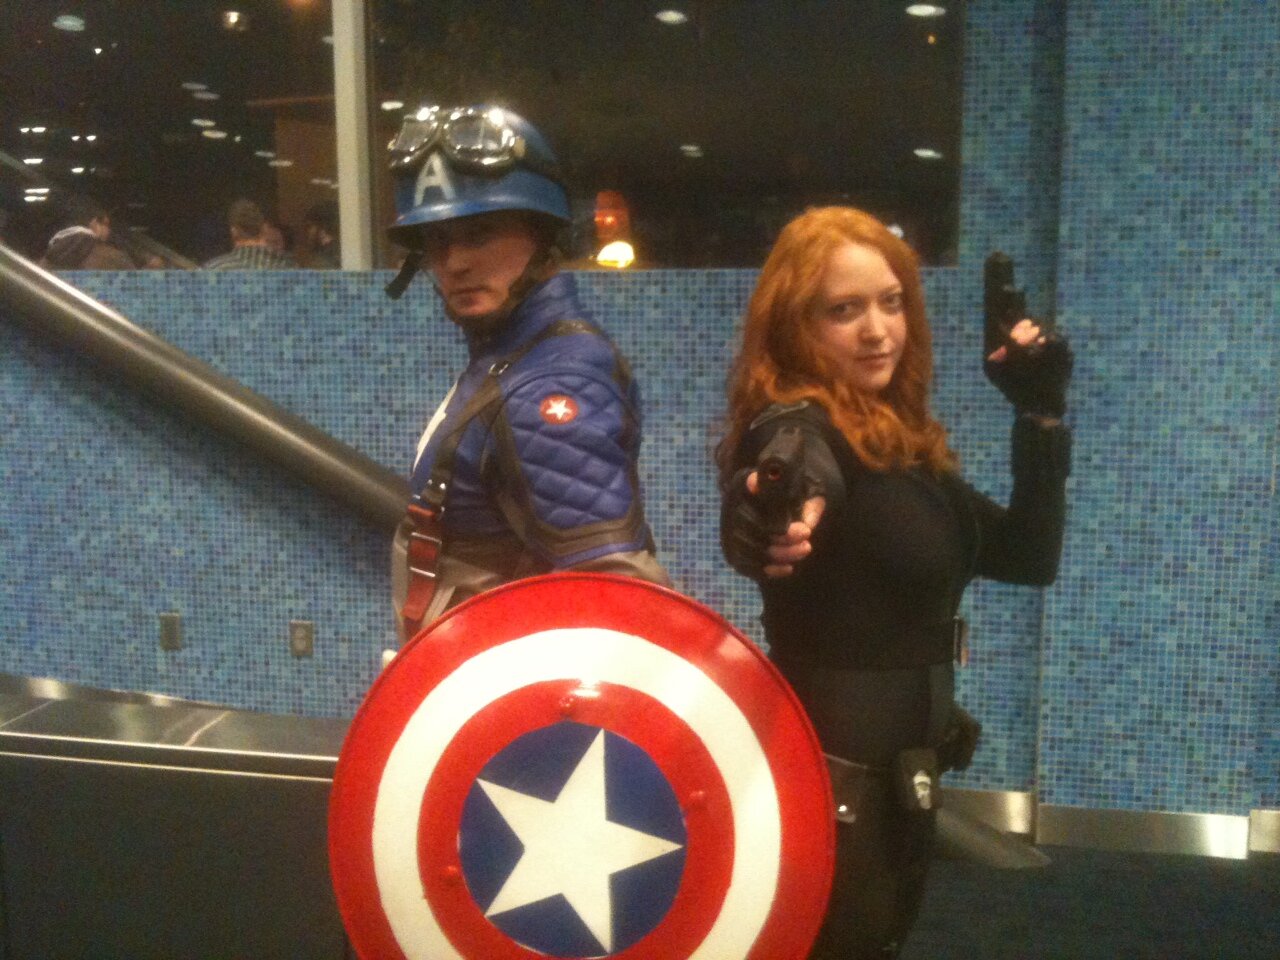 Expect similar fashion choices around theaters all weekend: Avengers fans at the Cinerama. (photo by Tony Kay)